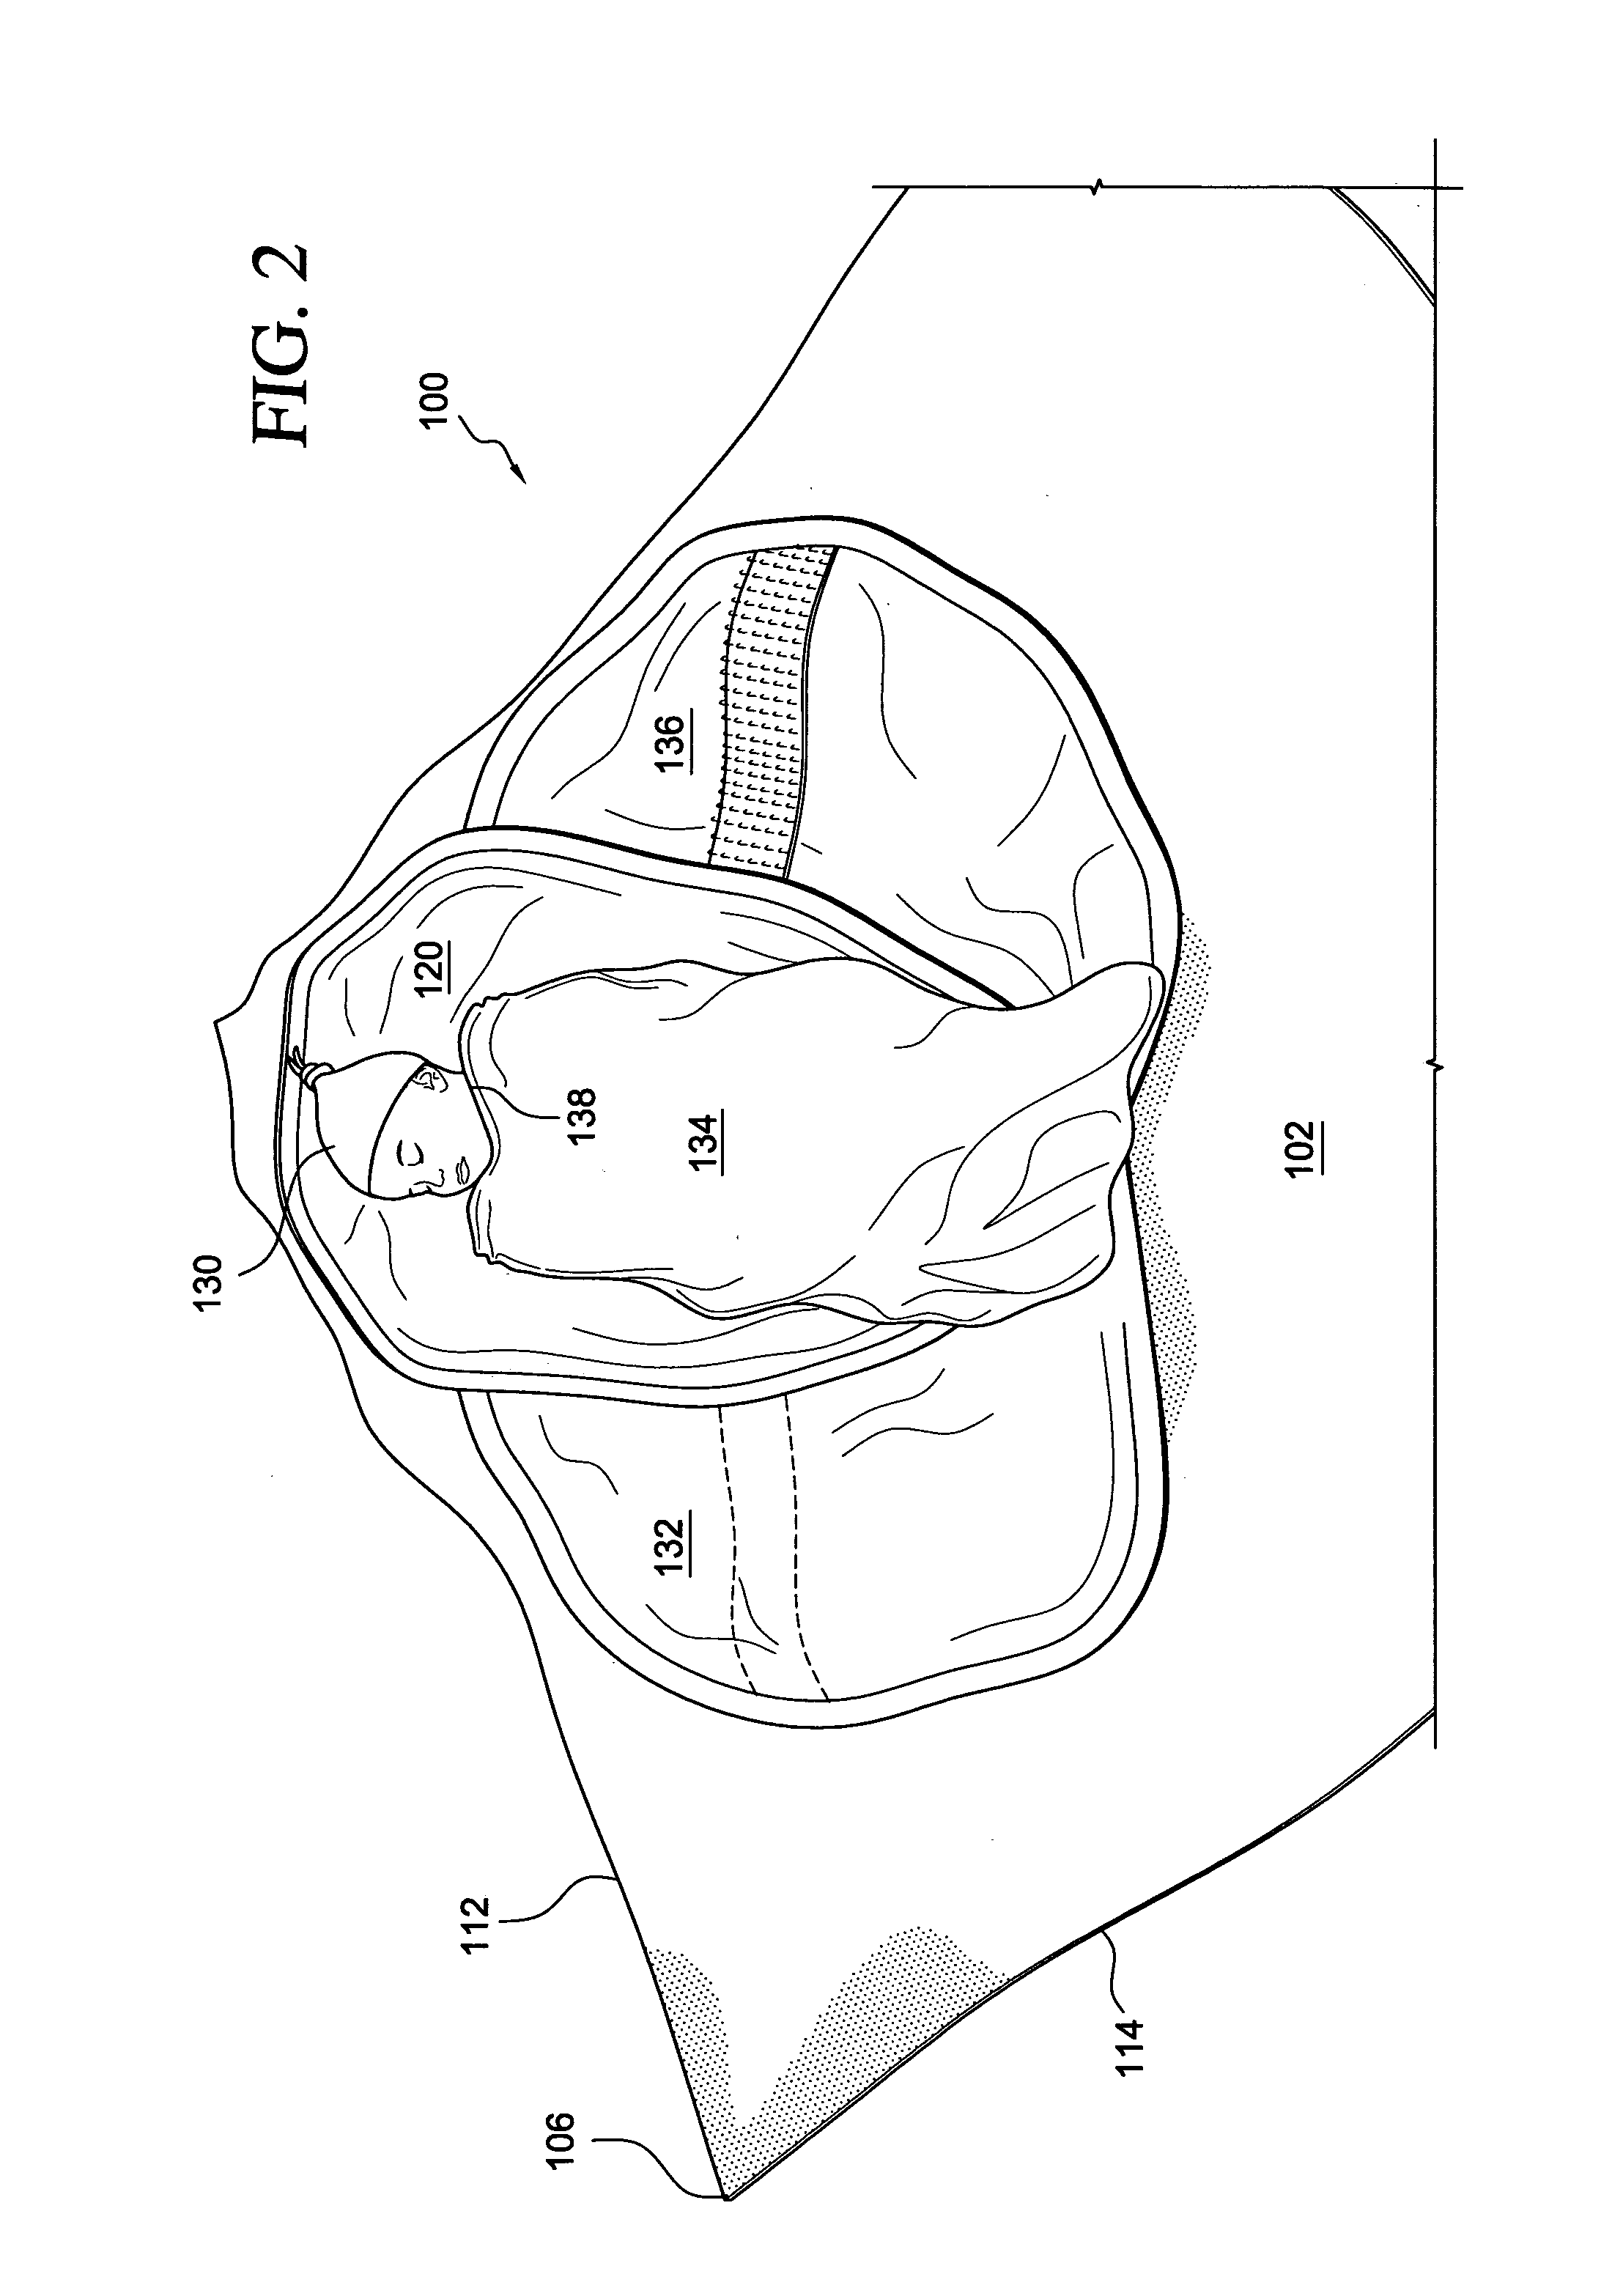 Swaddling blanket, paticularly for use in connection with premature infants, and method of using the same